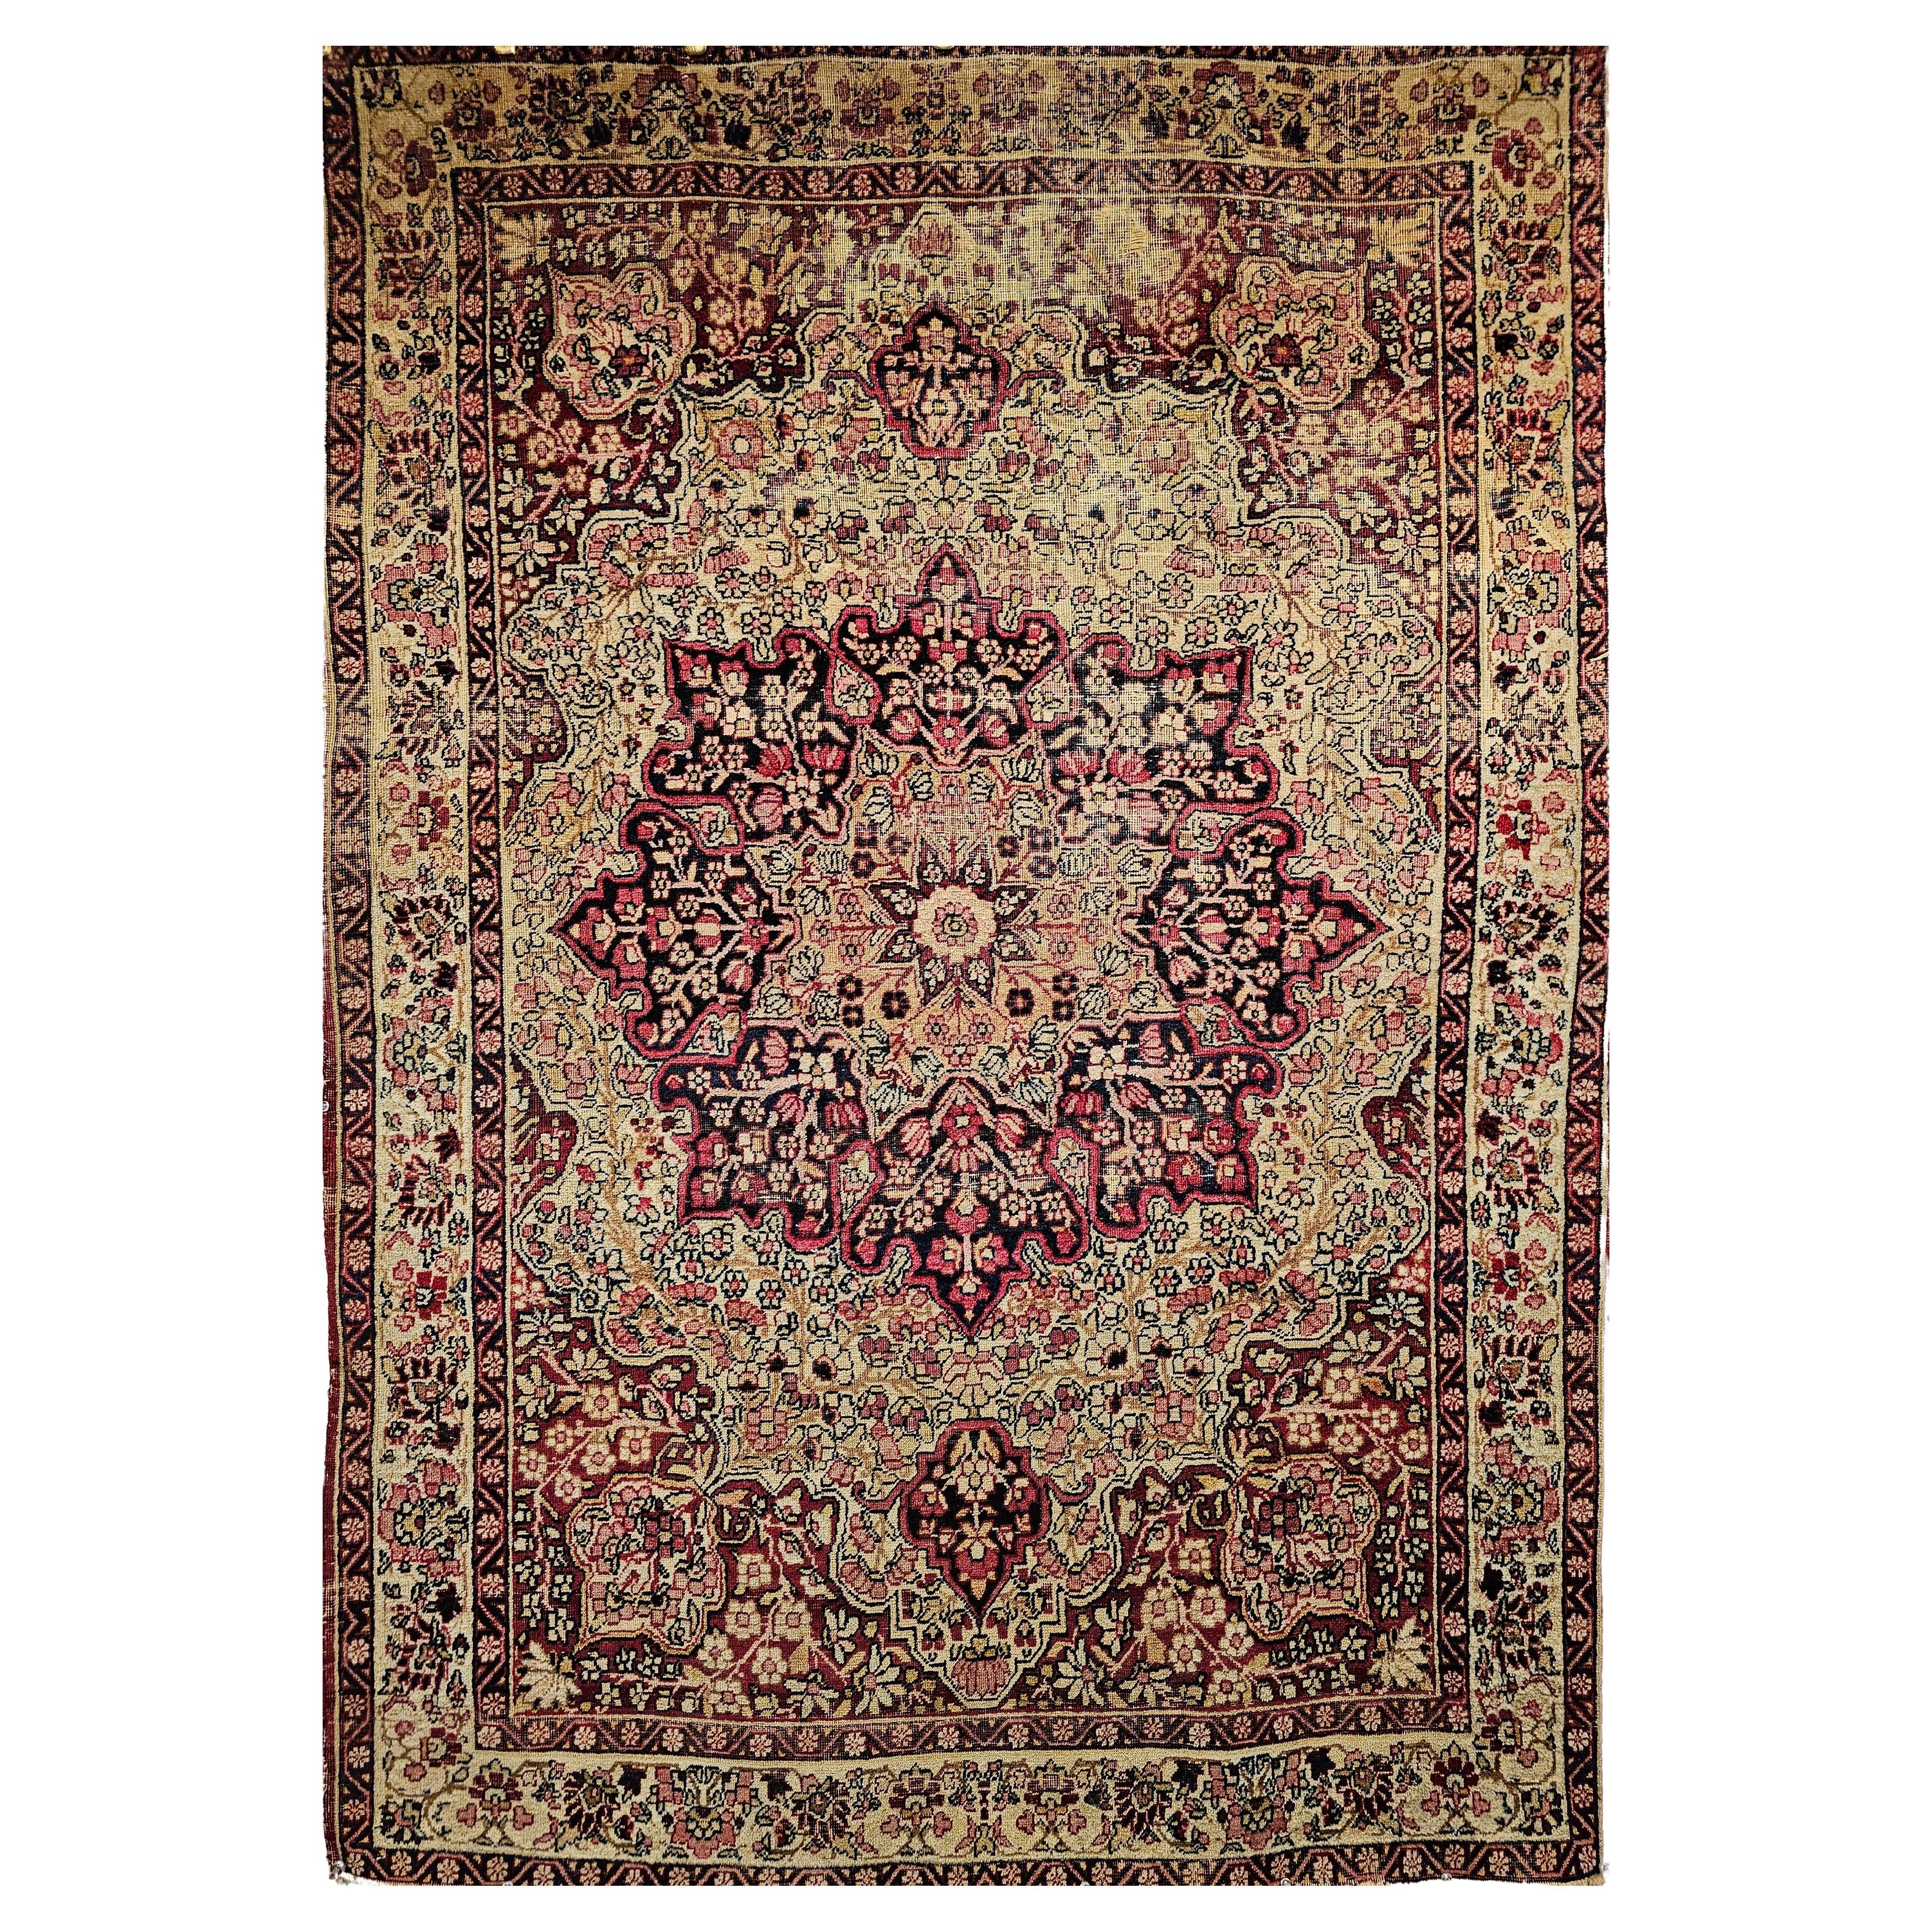 19th Century Persian Kerman Lavar in Floral Pattern in Red, Pale Yellow, Black For Sale